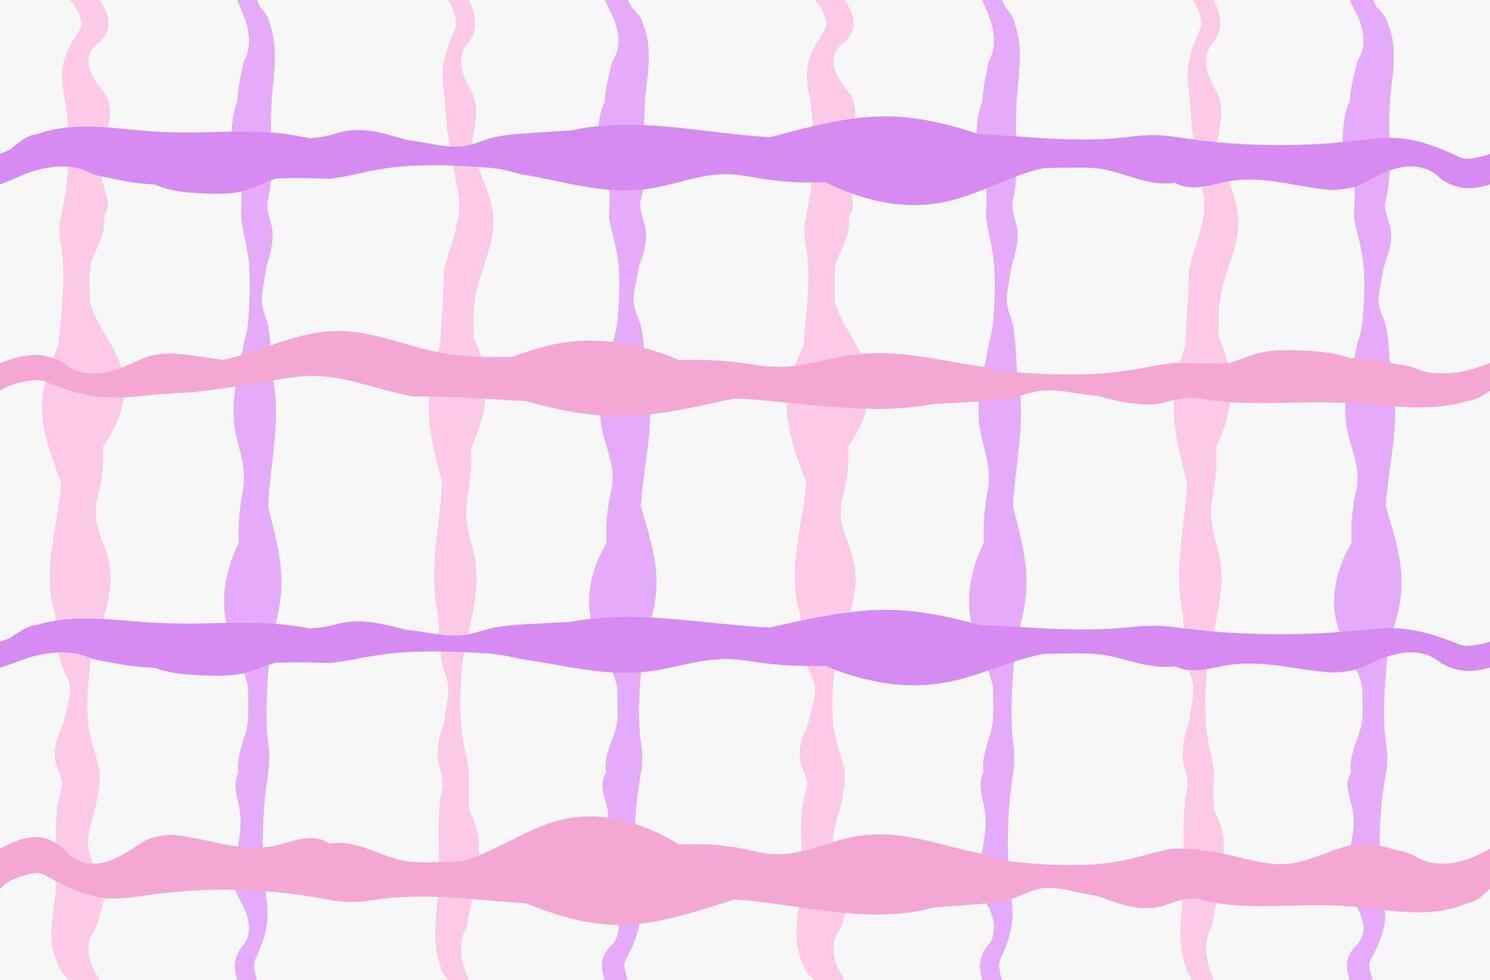 Doodle style cage. Background pattern seamless tiles. Use for design. vector